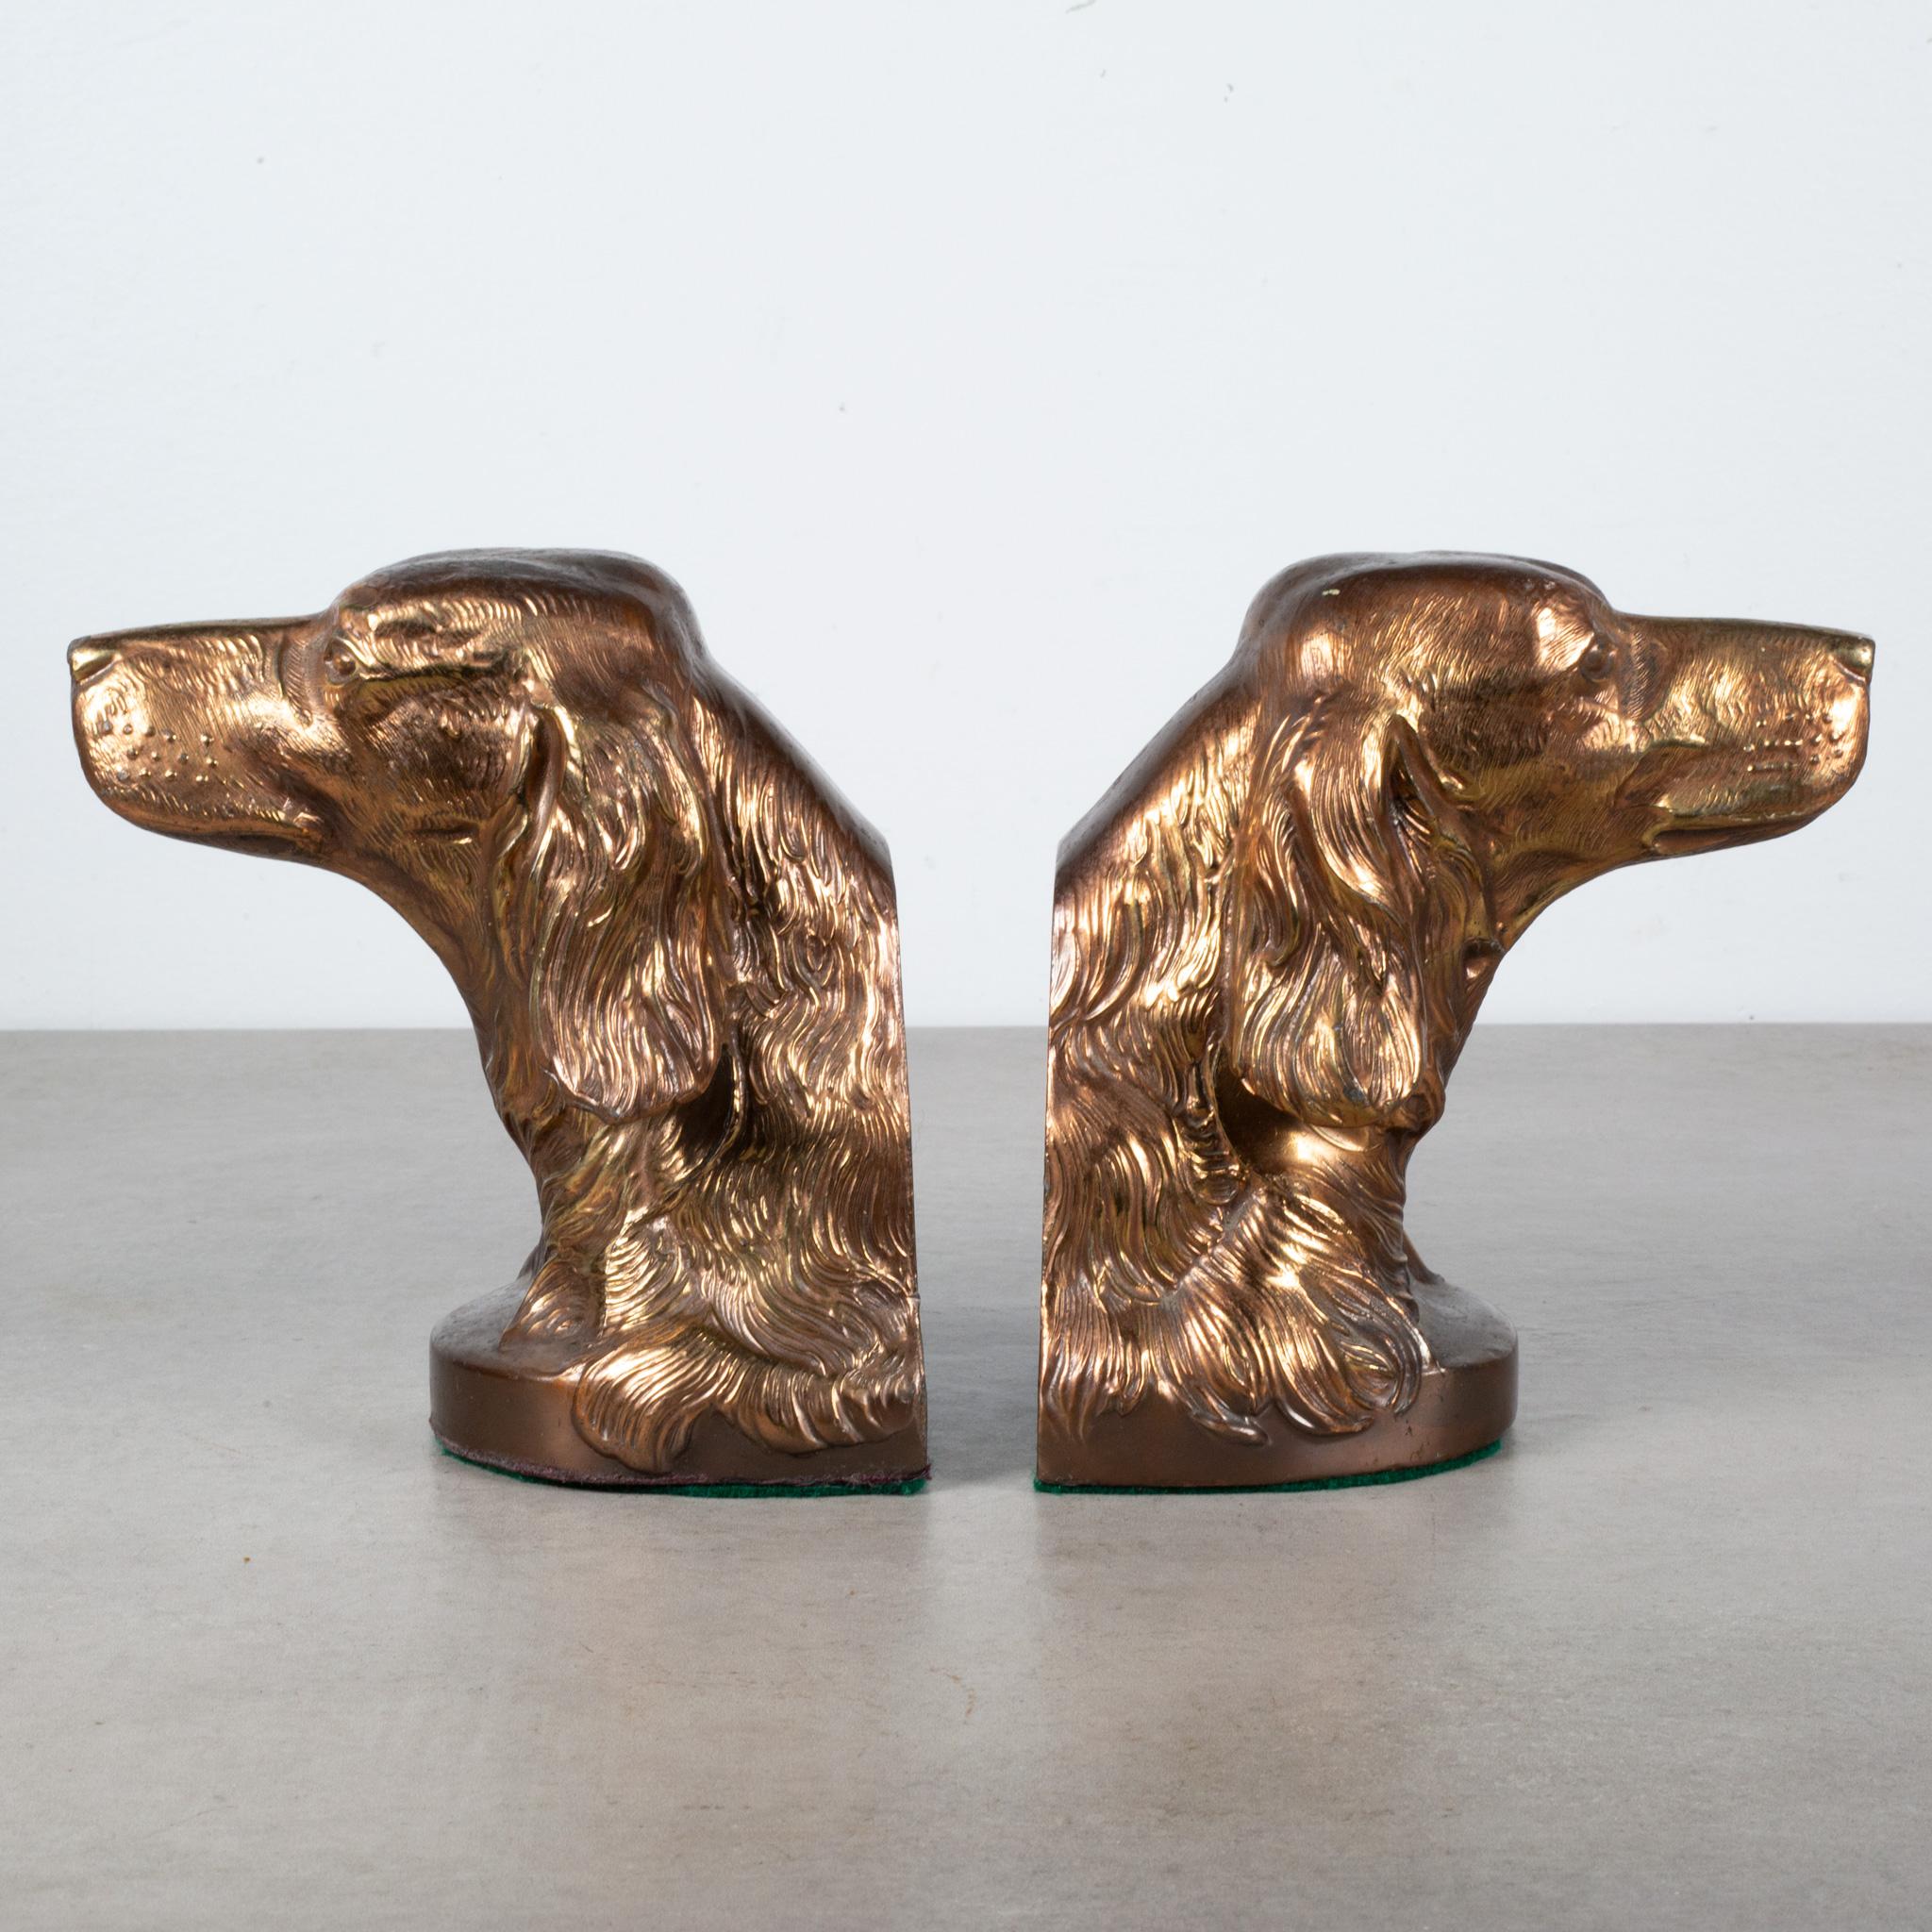 About

A pair of original bronze-plated bookends with original felt on the bottom. Stamped 